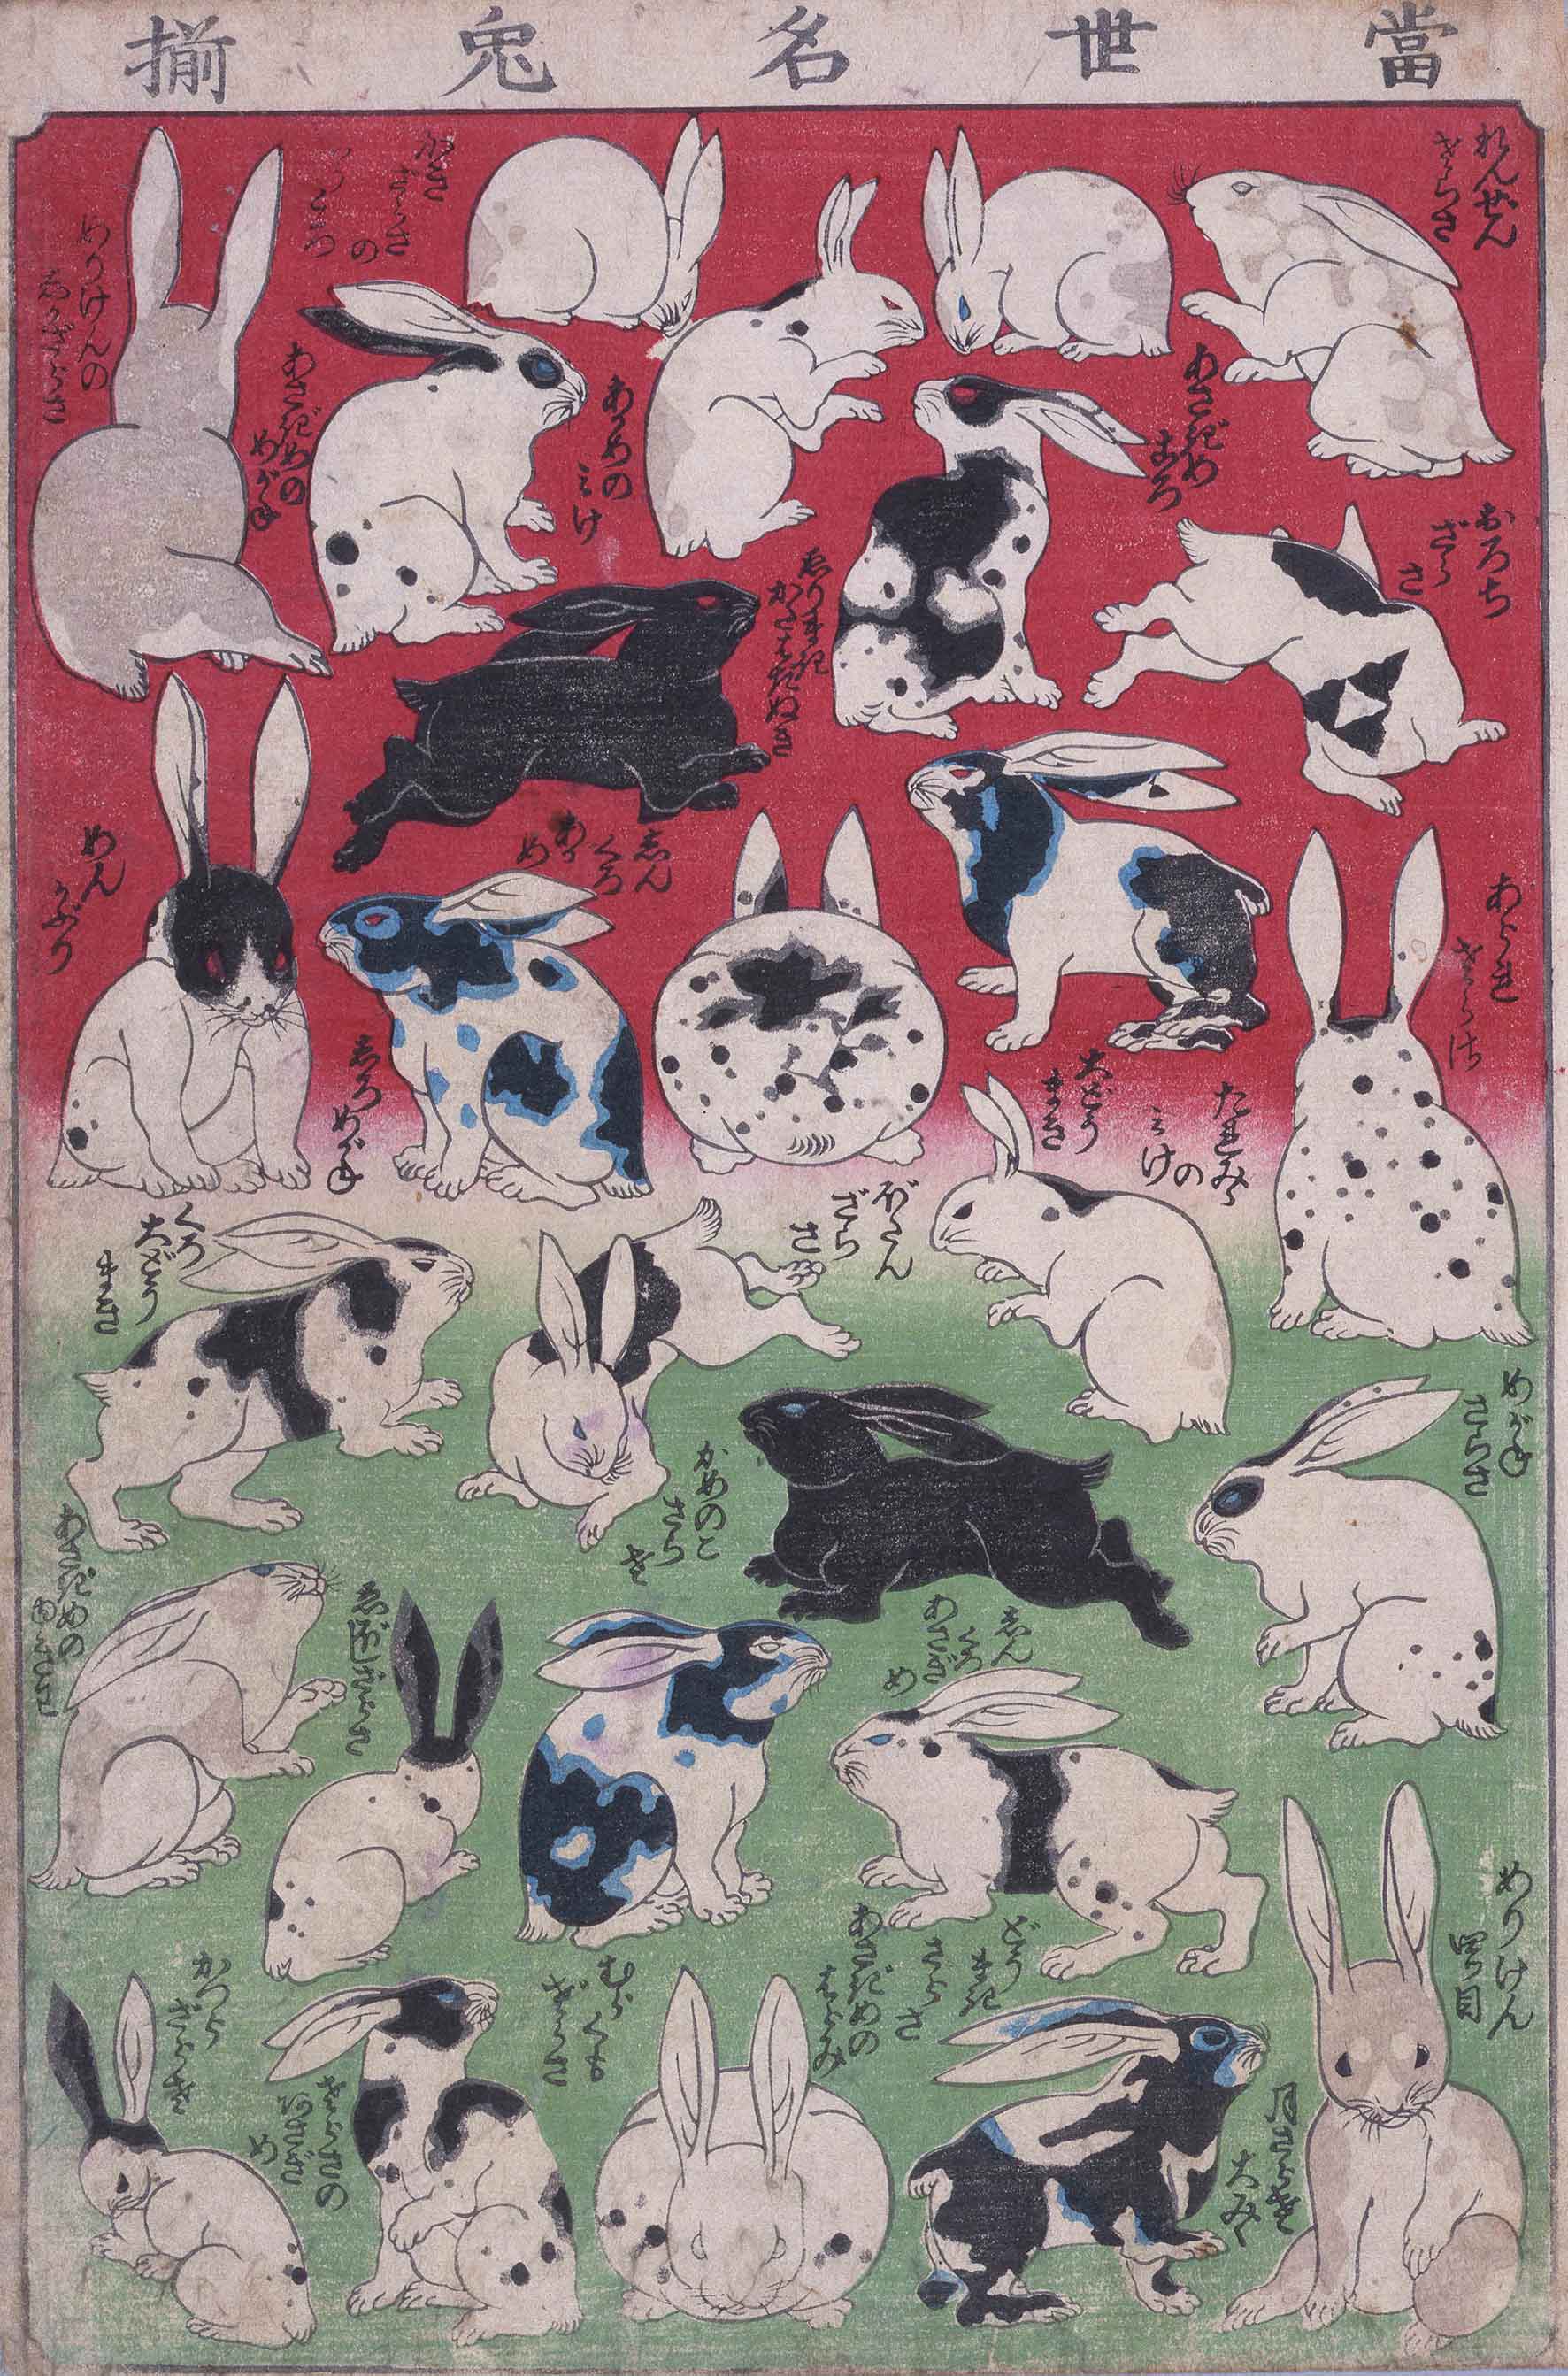 Animals in Japanese prints. Famous rabbits of today, anonymous, circa 1868-1877, Meiji period. All images from the collection of the Edo-Tokyo Museum